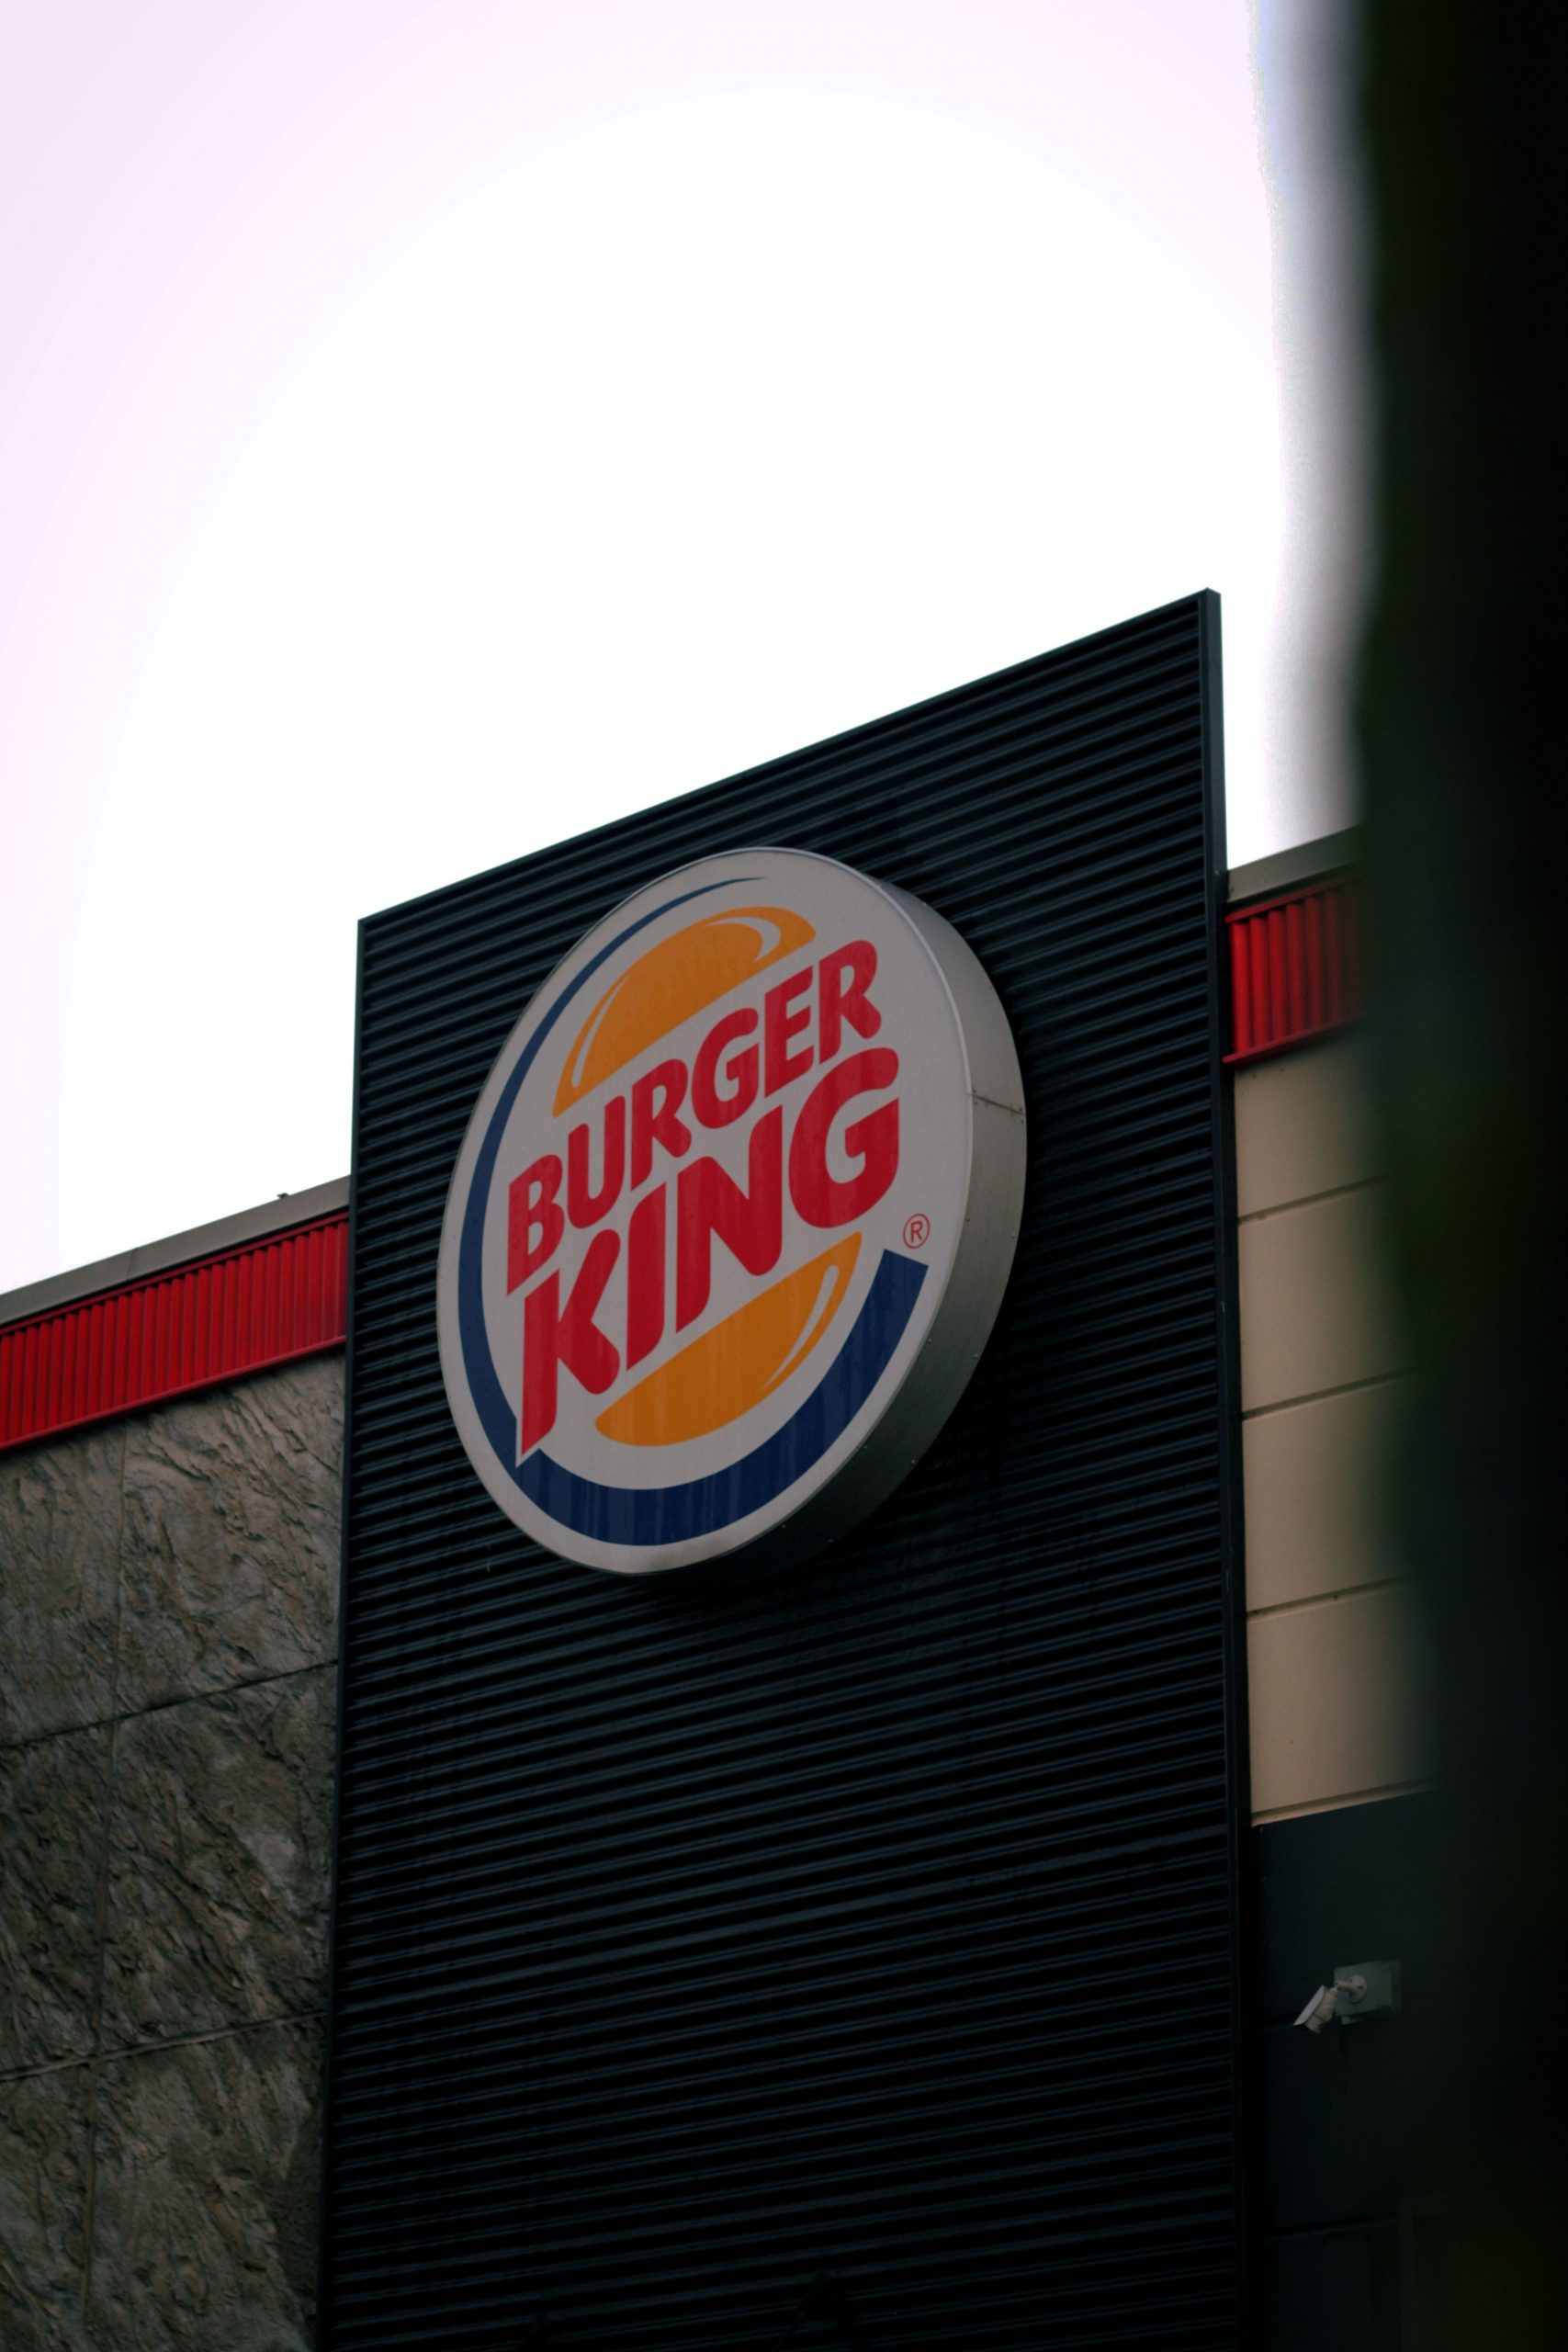 Why Burger King has been unable to leave Russia after the Ukraine invasion